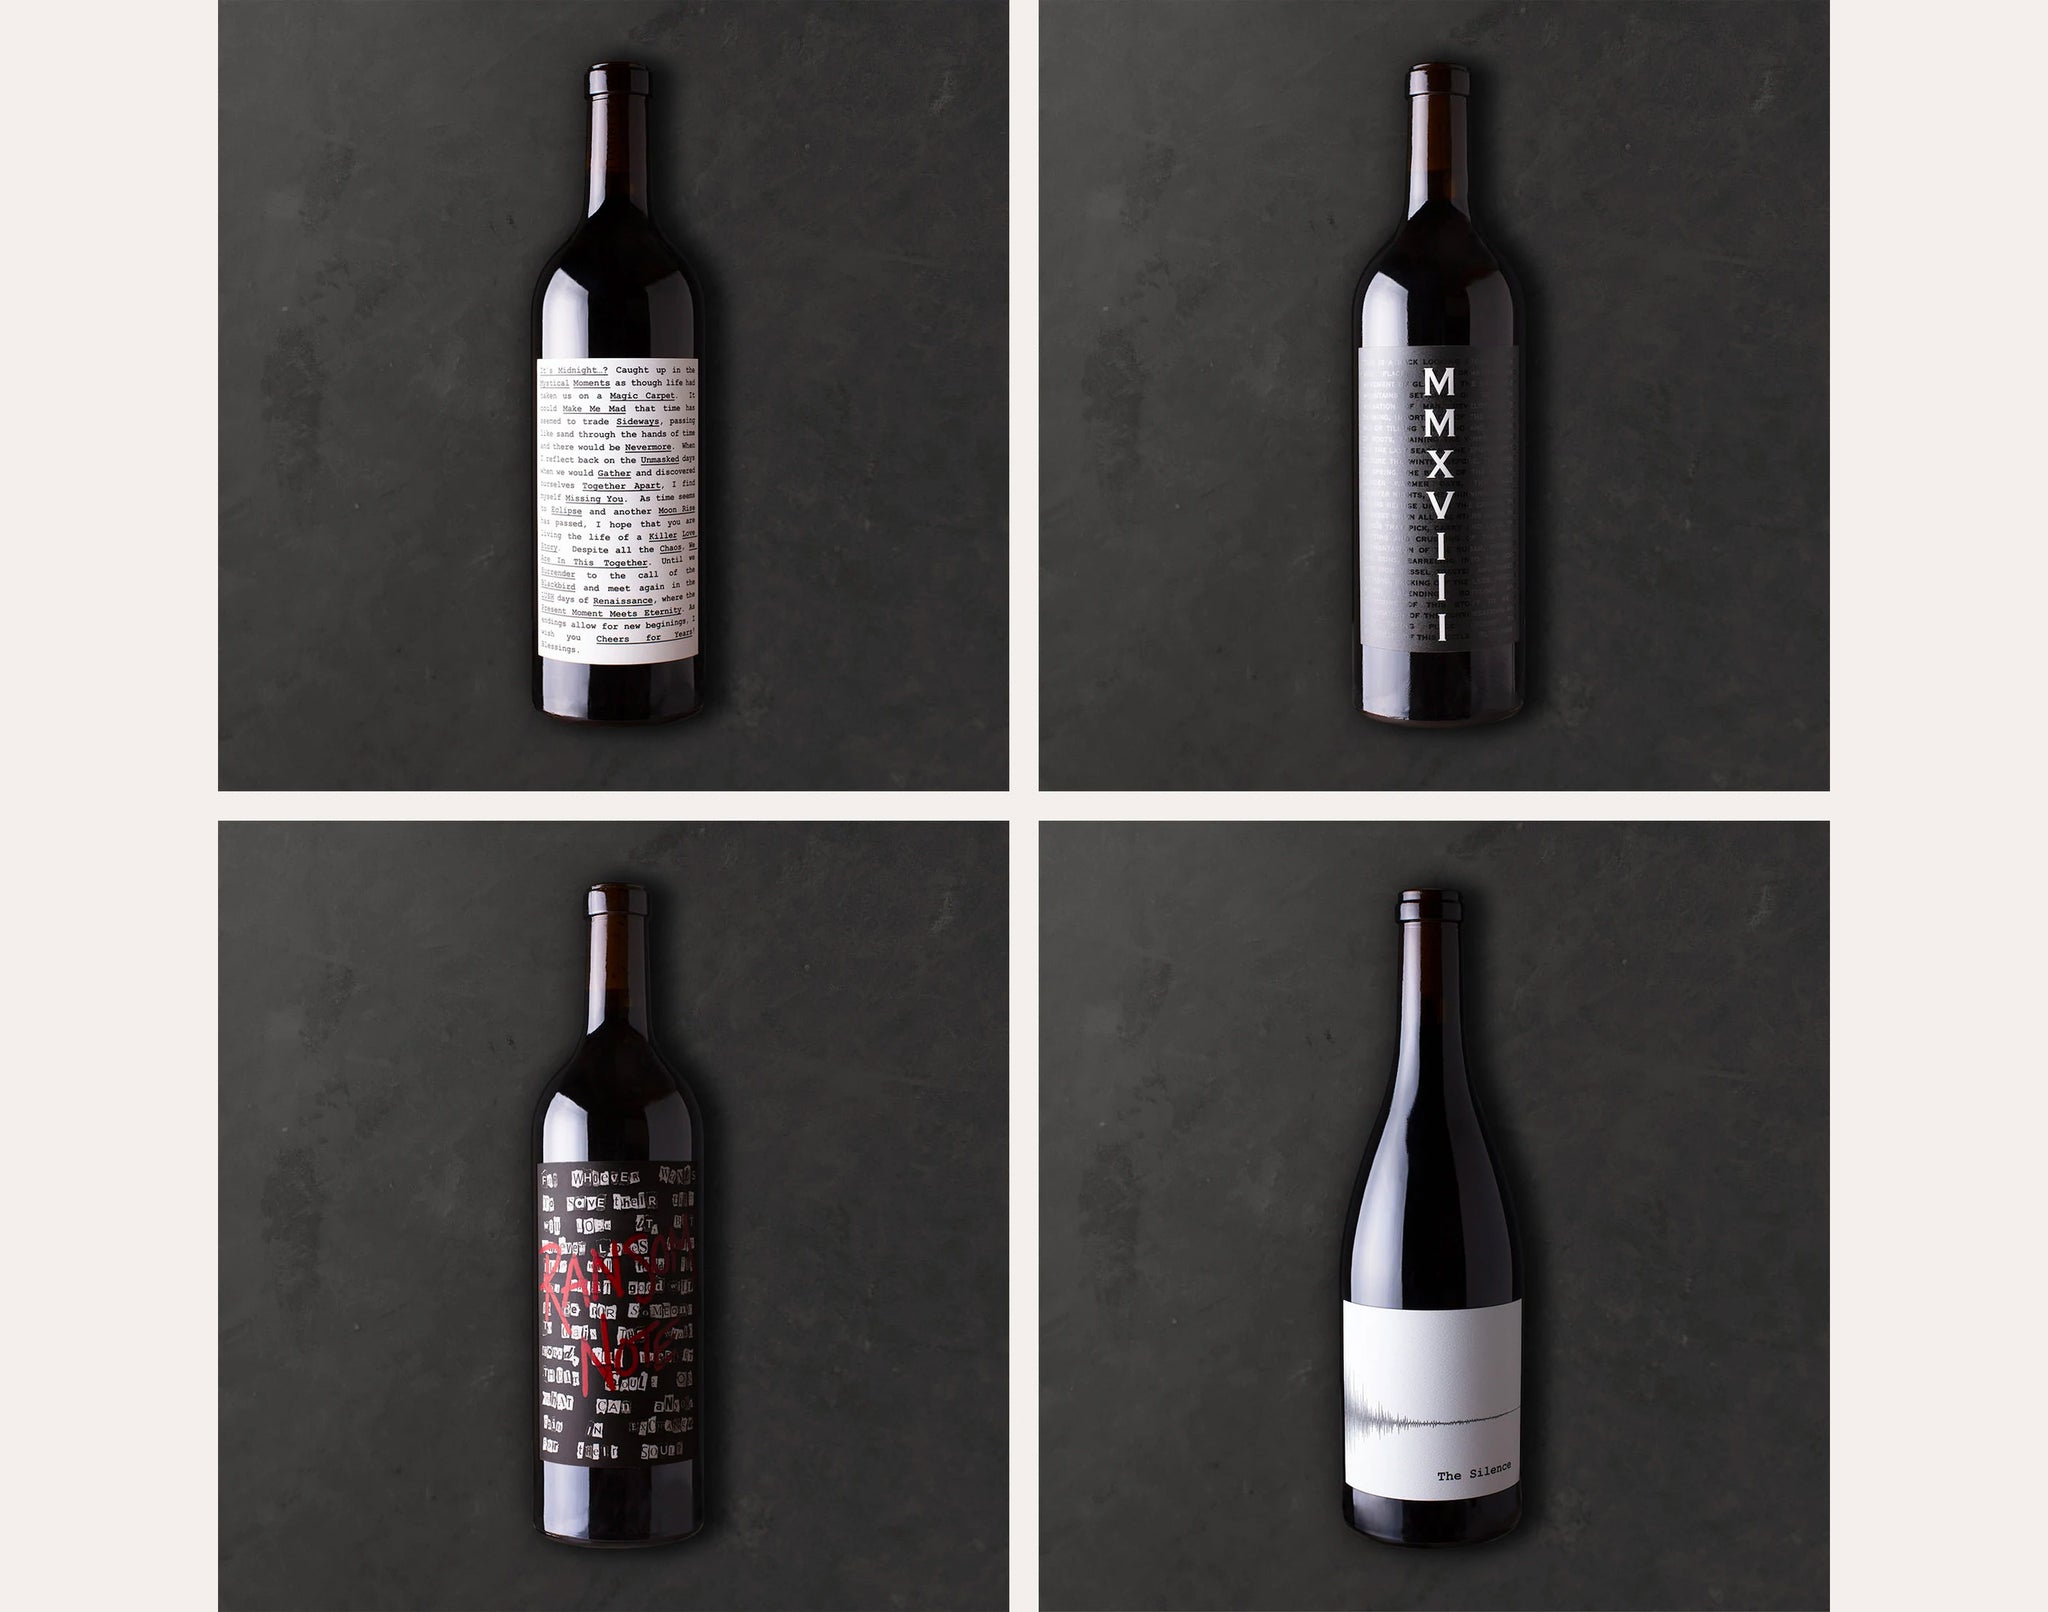 Four photos of Foundation Cellars wine bottles by Bloom Studio